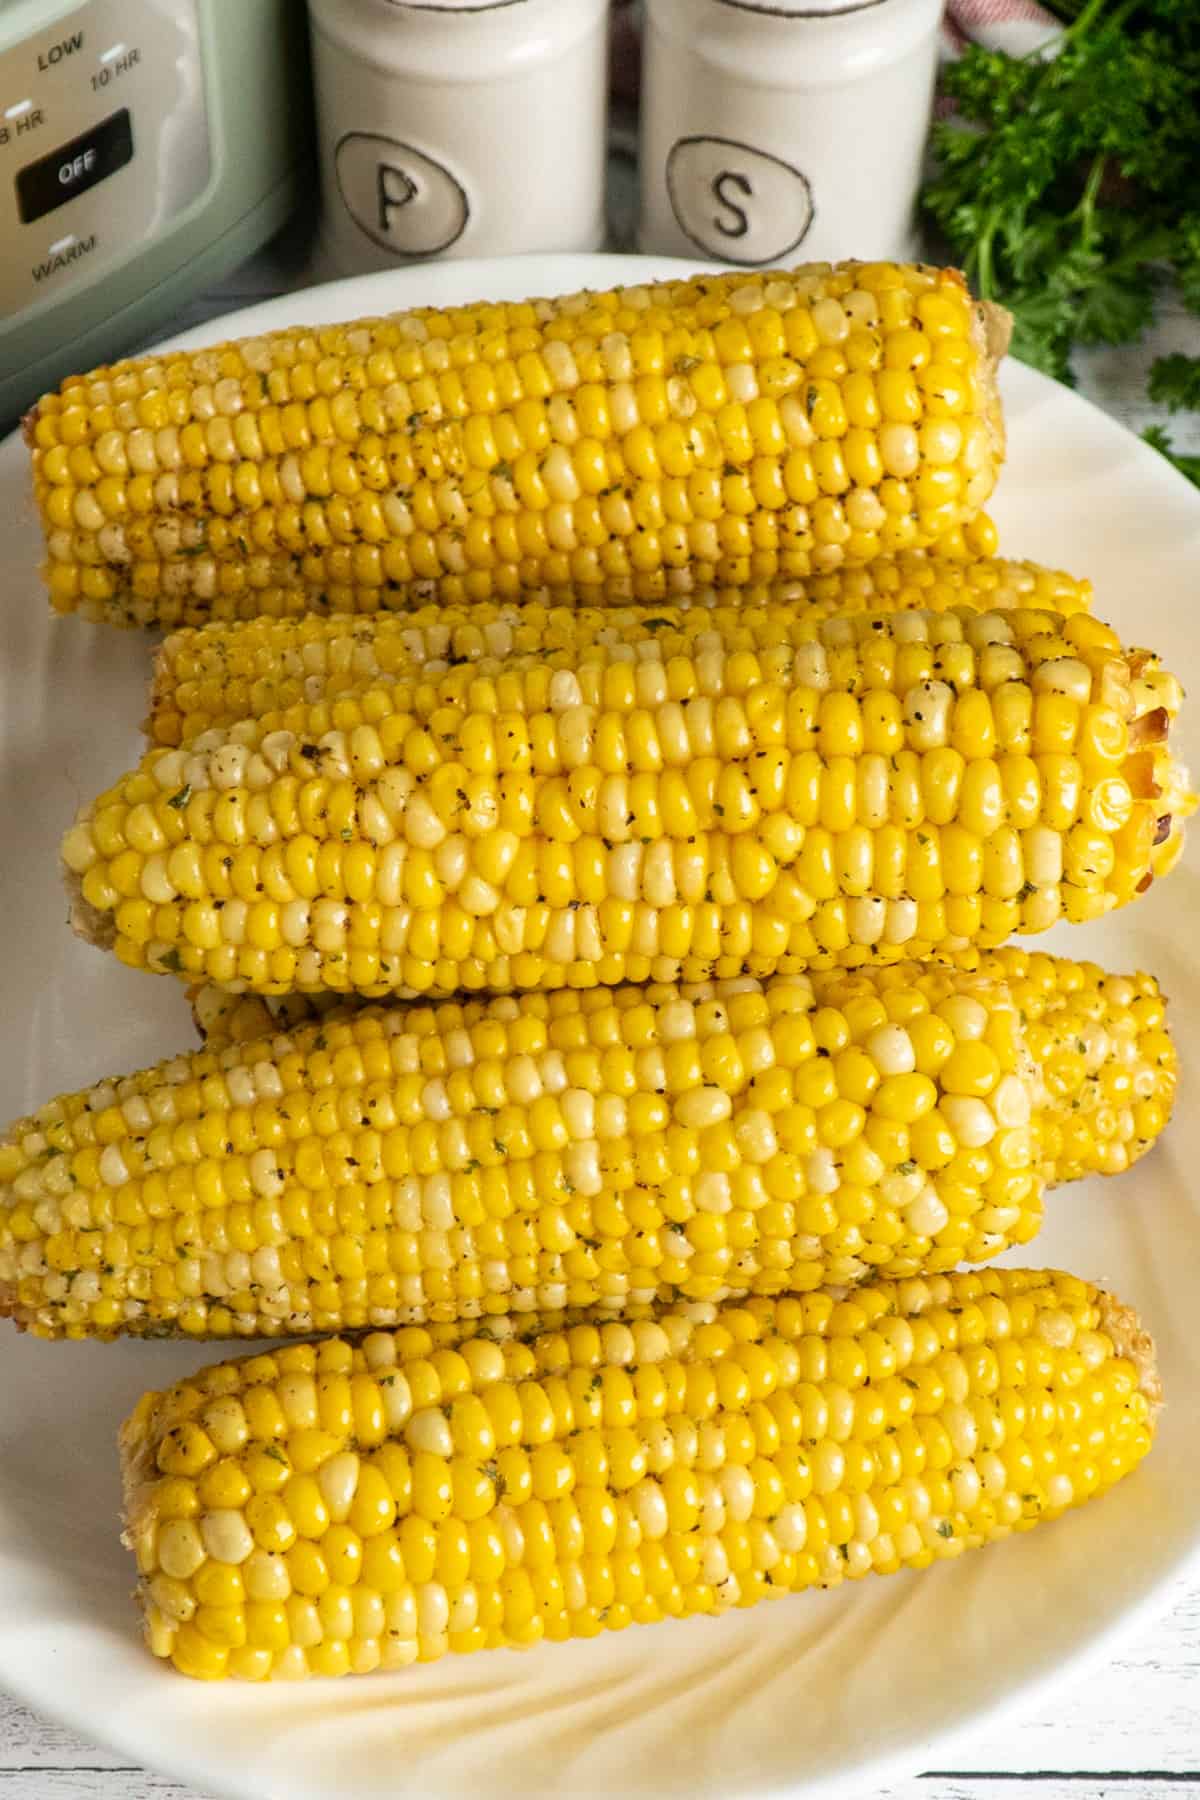 Corn that has been seasoned and buttered on a plate.